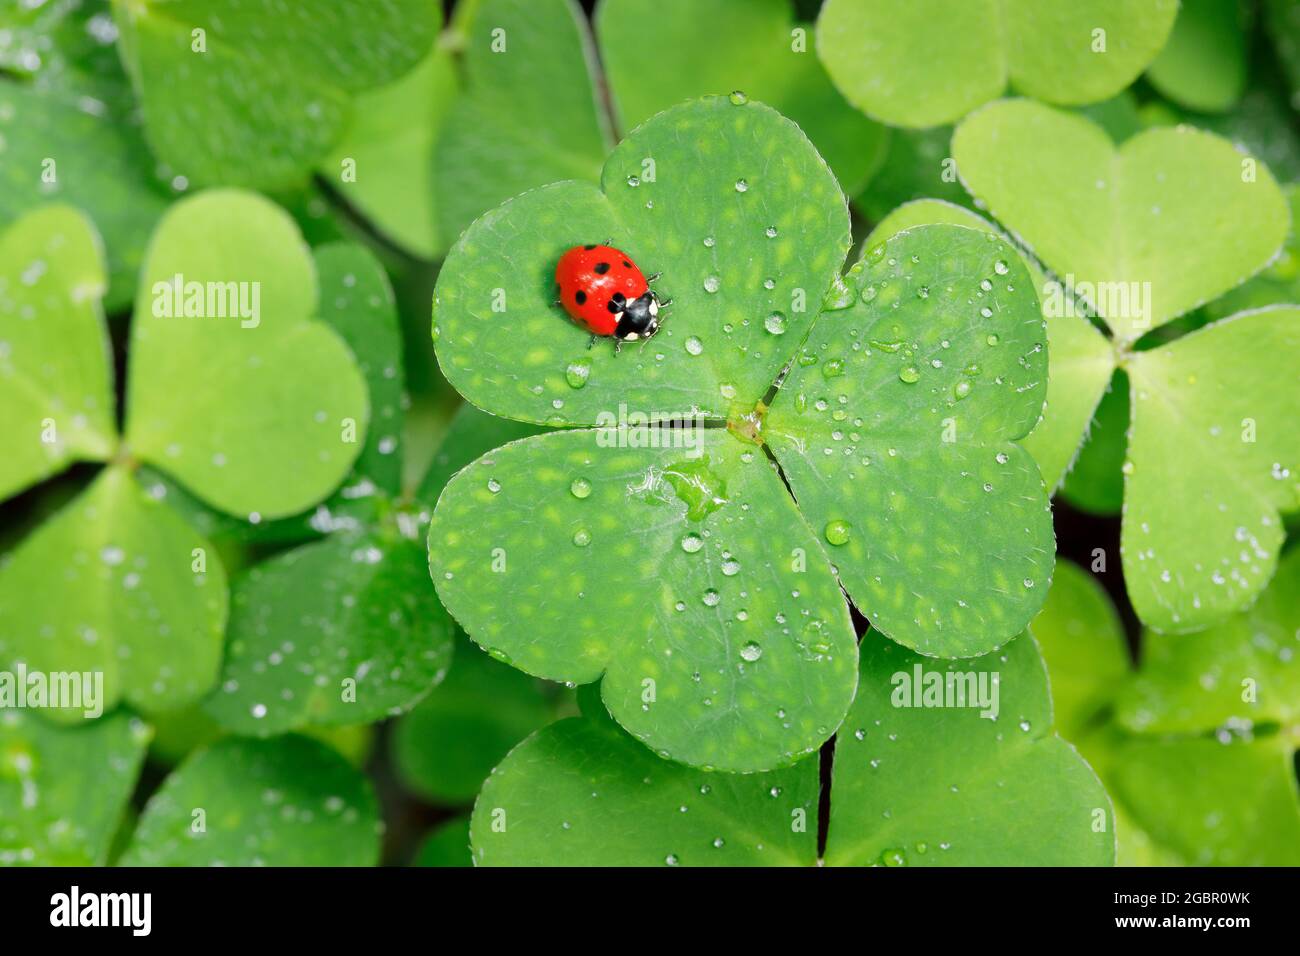 zoology, insects (Insecta), seven-spotted lady beetle on clover, Switzerland, NO-EXCLUSIVE-USE FOR FOLDING-CARD-GREETING-CARD-POSTCARD-USE Stock Photo